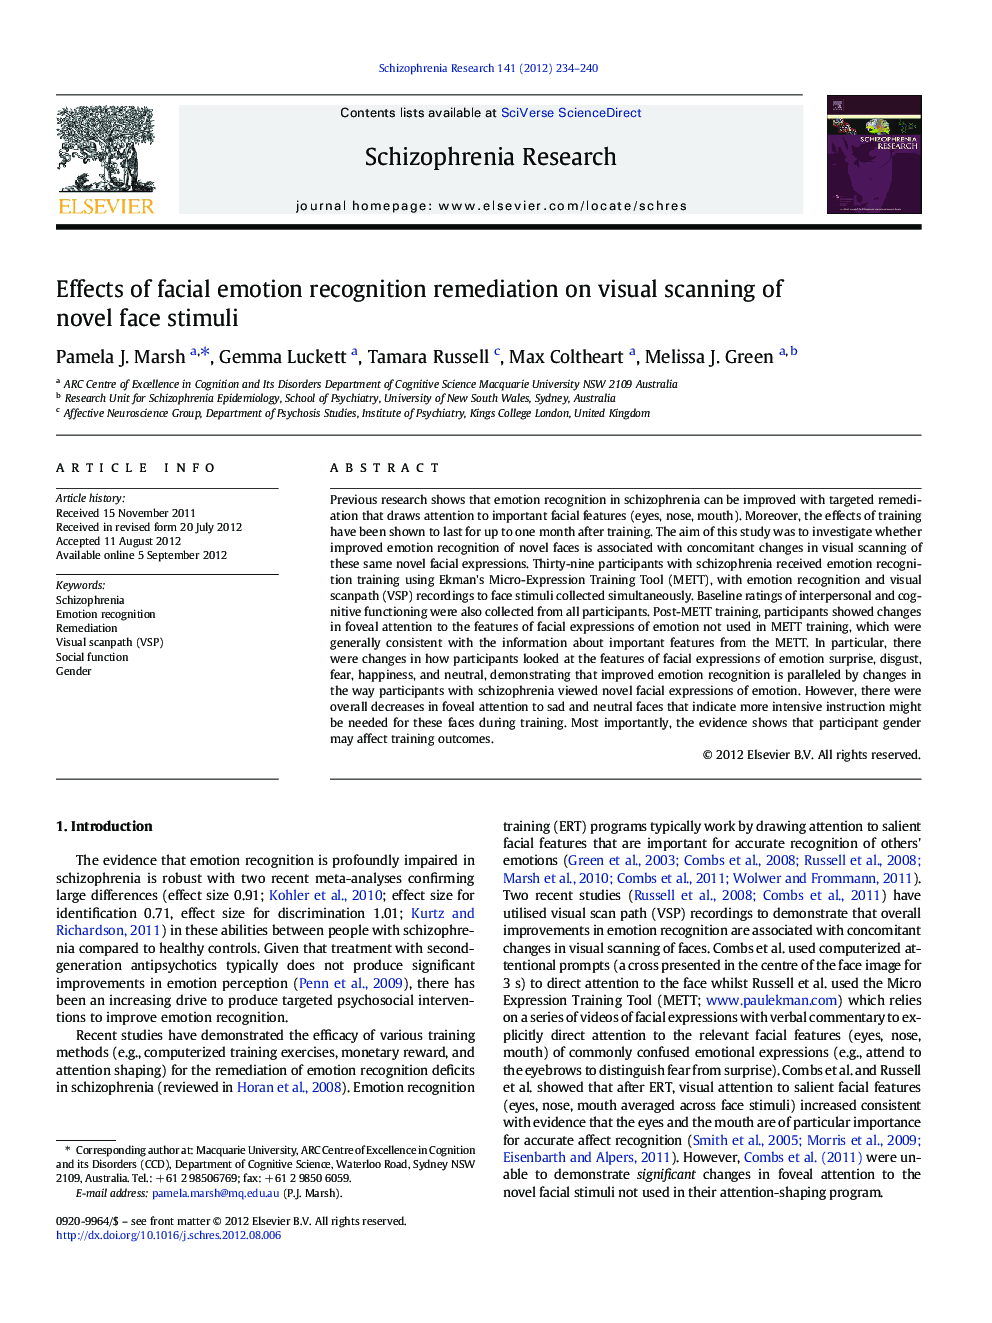 Effects of facial emotion recognition remediation on visual scanning of novel face stimuli